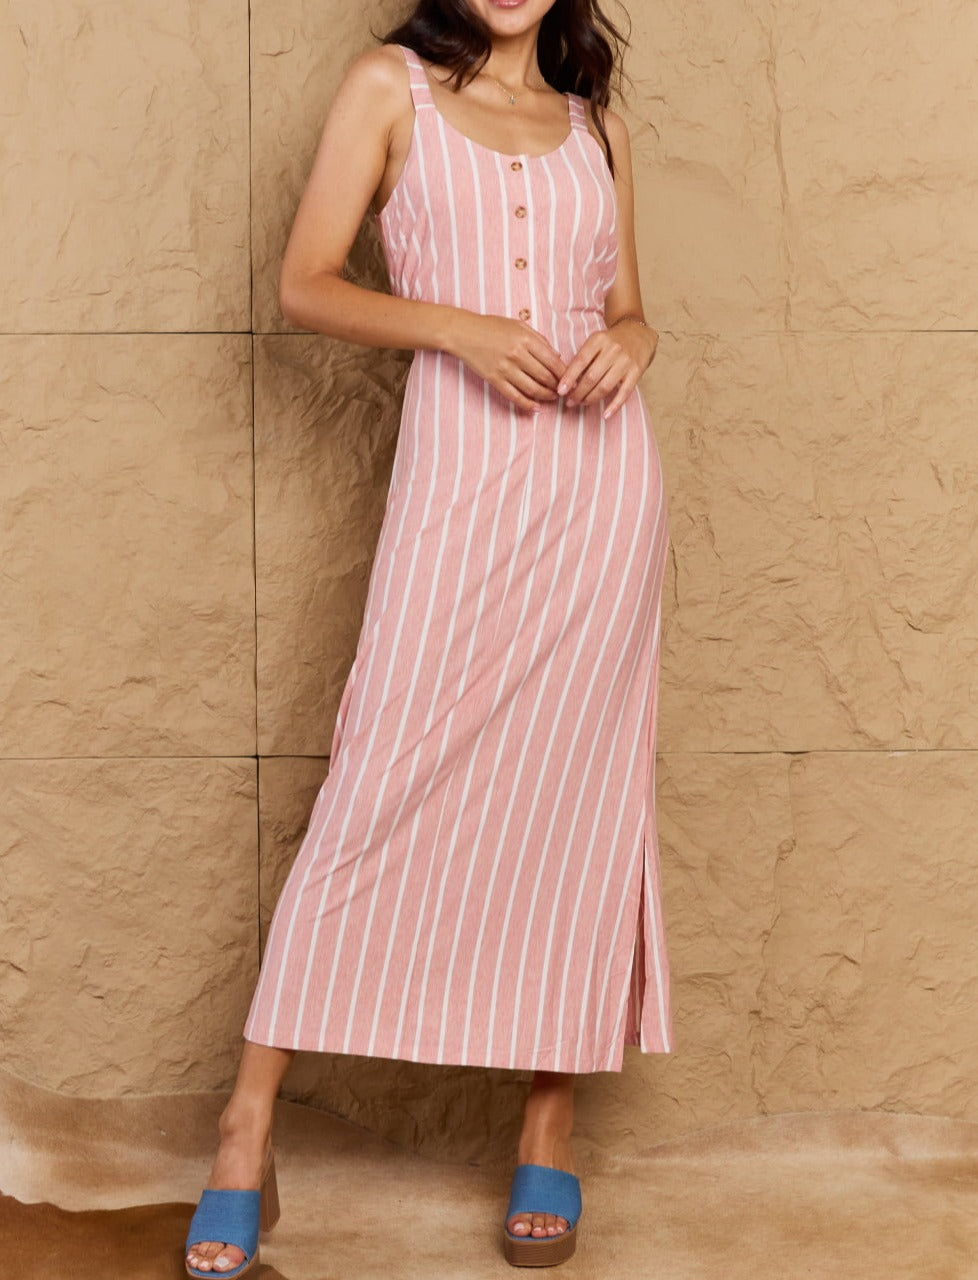 OOTD Sweet Talk Stripe Texture Knit Maxi Dress in Dusty Pink/Ivory - Cheeky Chic Boutique